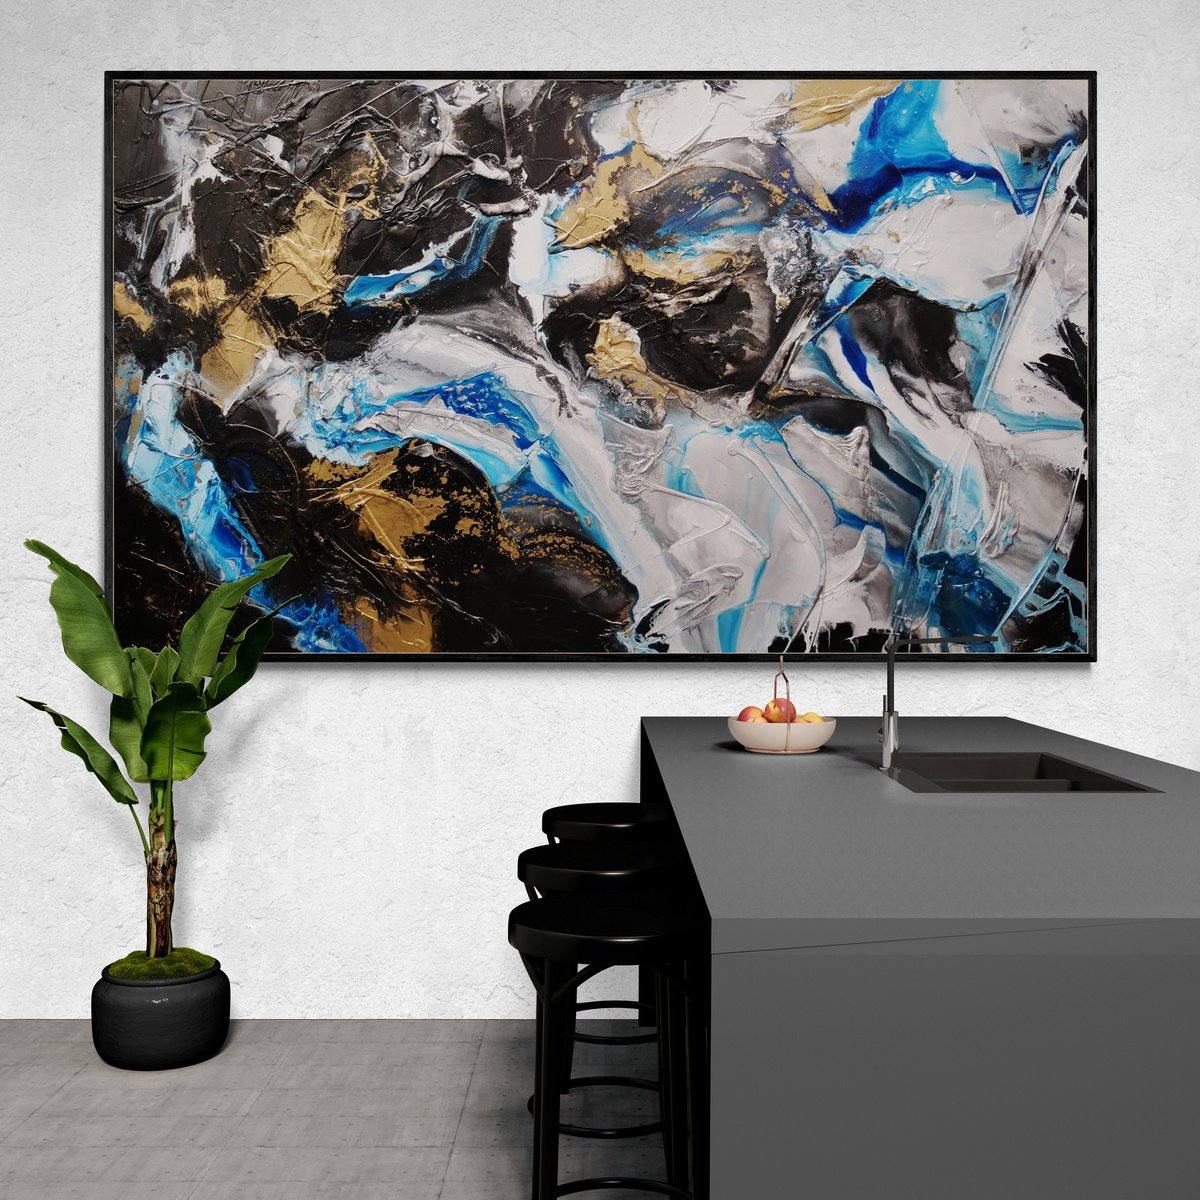 Cobalt Bliss 250cm x 150cm Textured Abstract Art by Franko